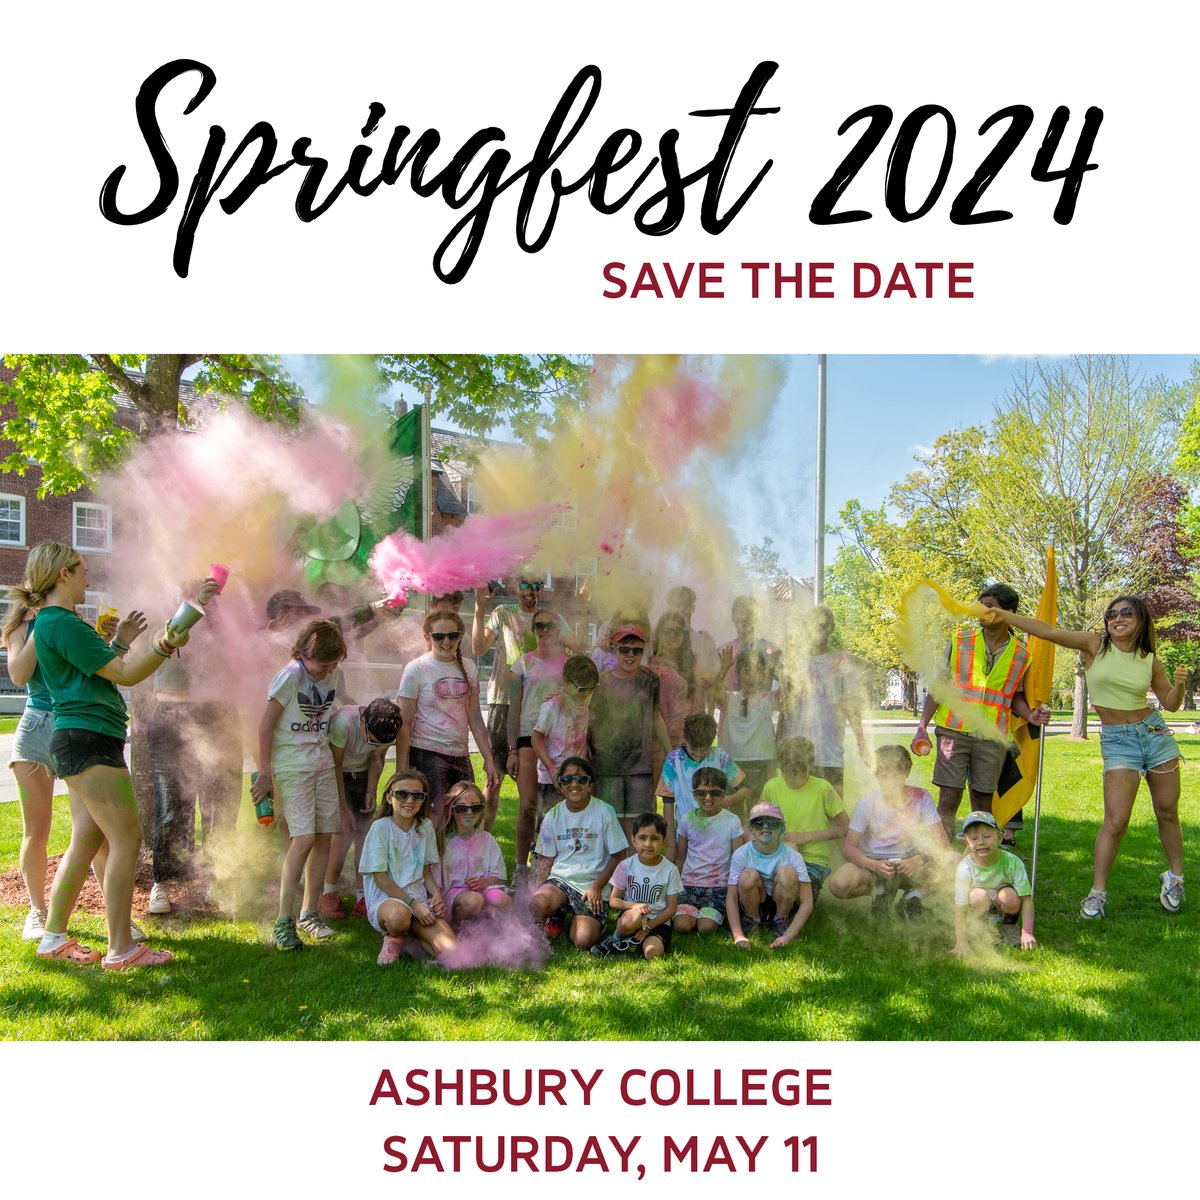 Save the date for Springfest 2024 happening this Saturday, May 11th! Come by campus for a day of school spirit, music, sports, and more. #spring #springfest #springfest2024 #springtime